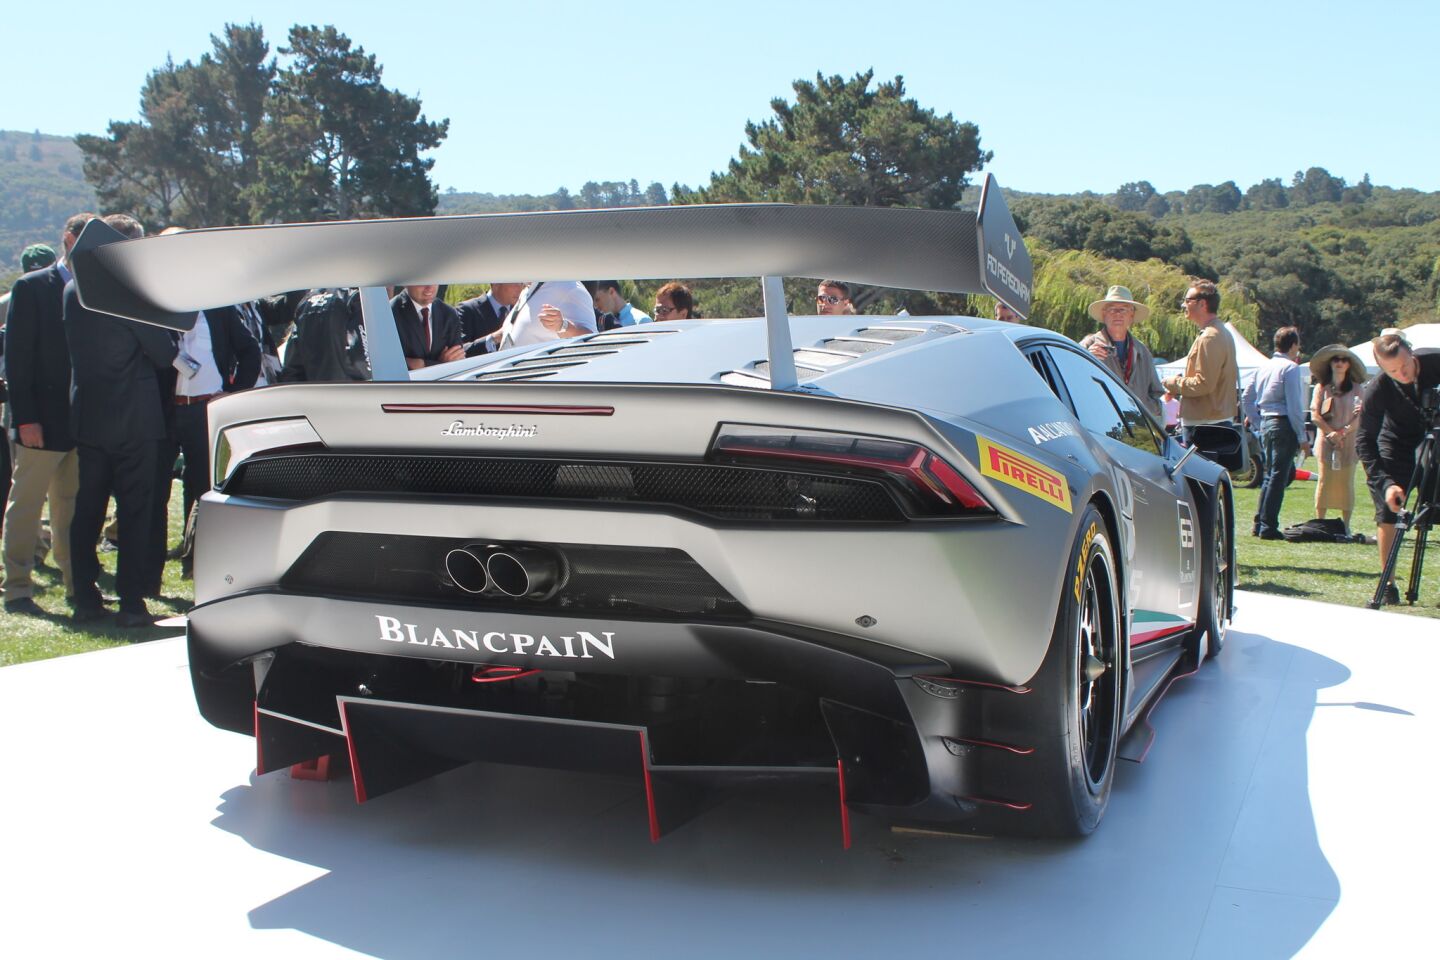 Lamborghini announced its all-new Huracan Super Trofeo at the annual Quail Motorsports Gathering in Carmel, Calif. on Friday.